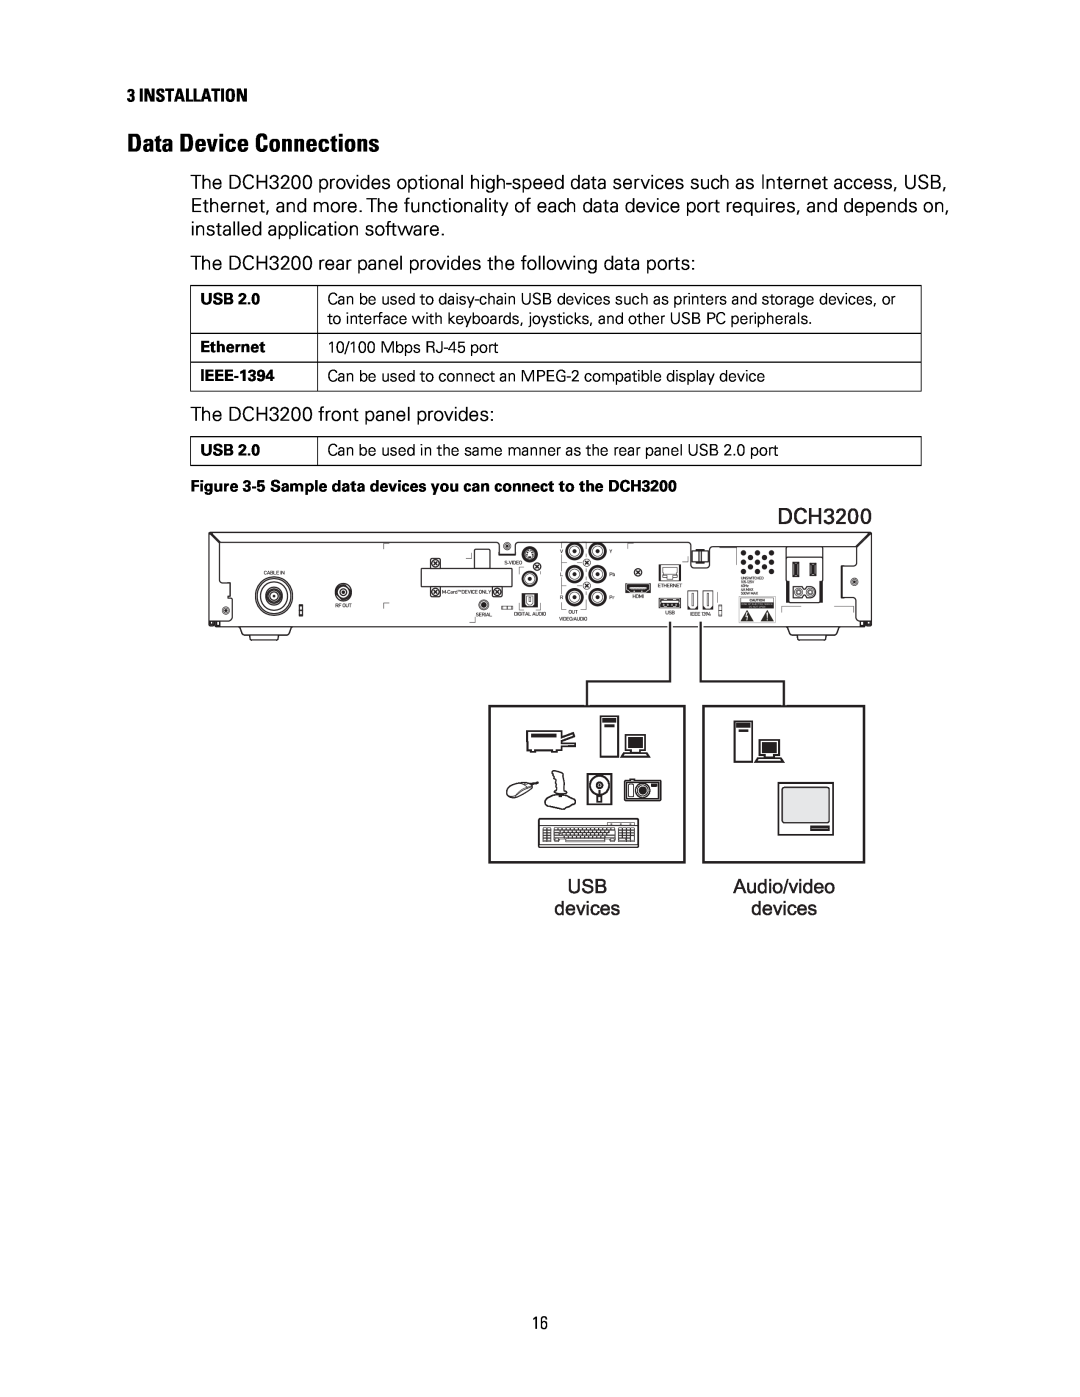 Motorola DCH3200 installation manual Data Device Connections 